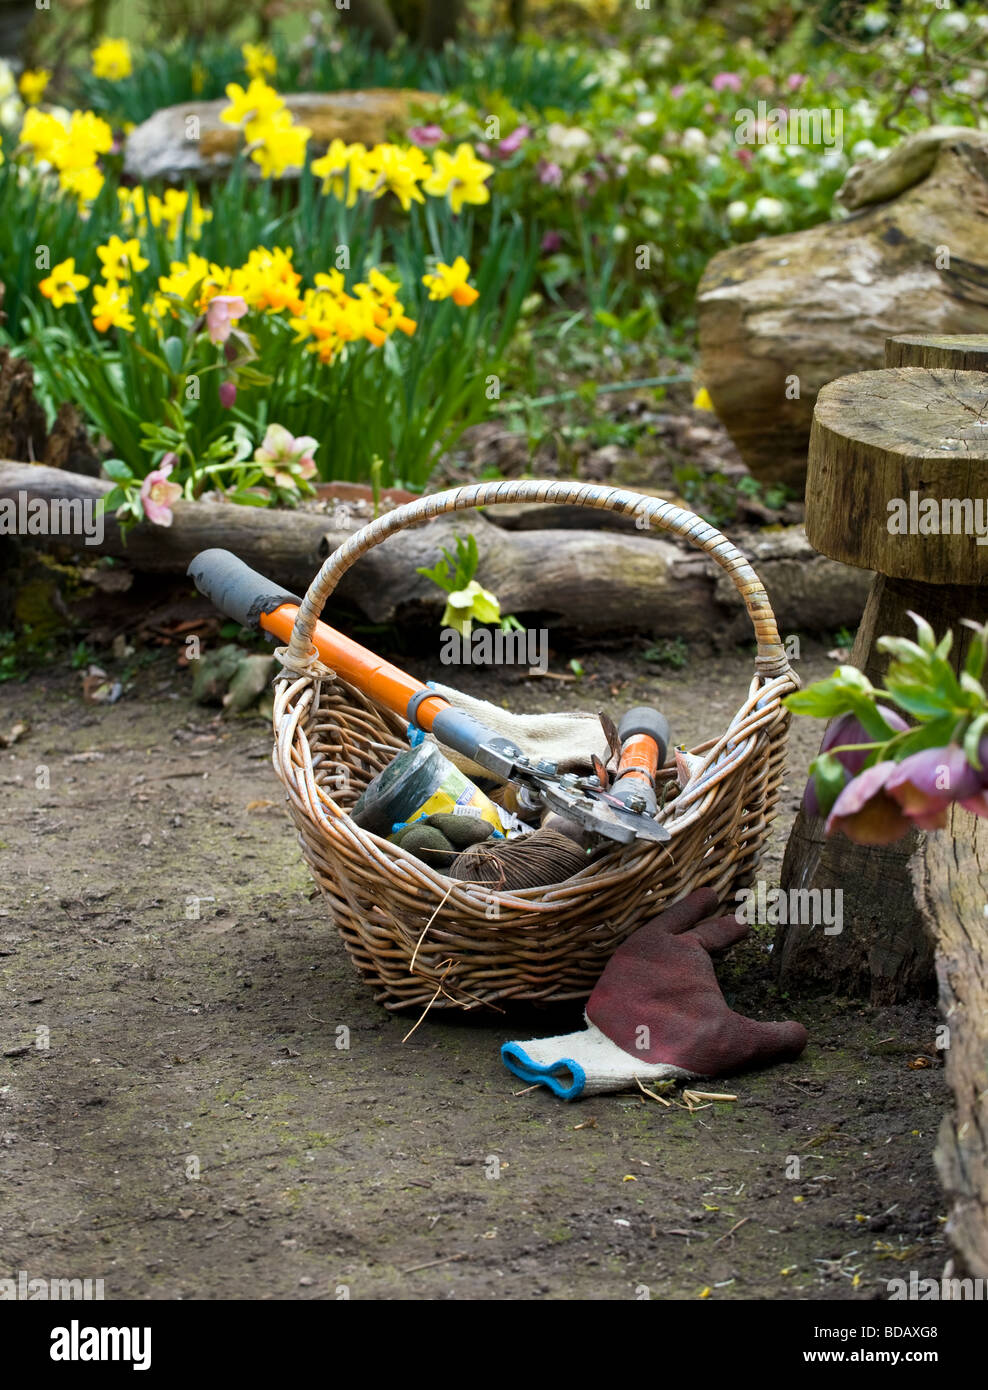 Gardeners Tools, Gloves and Basket in Spring Garden Stock Photo